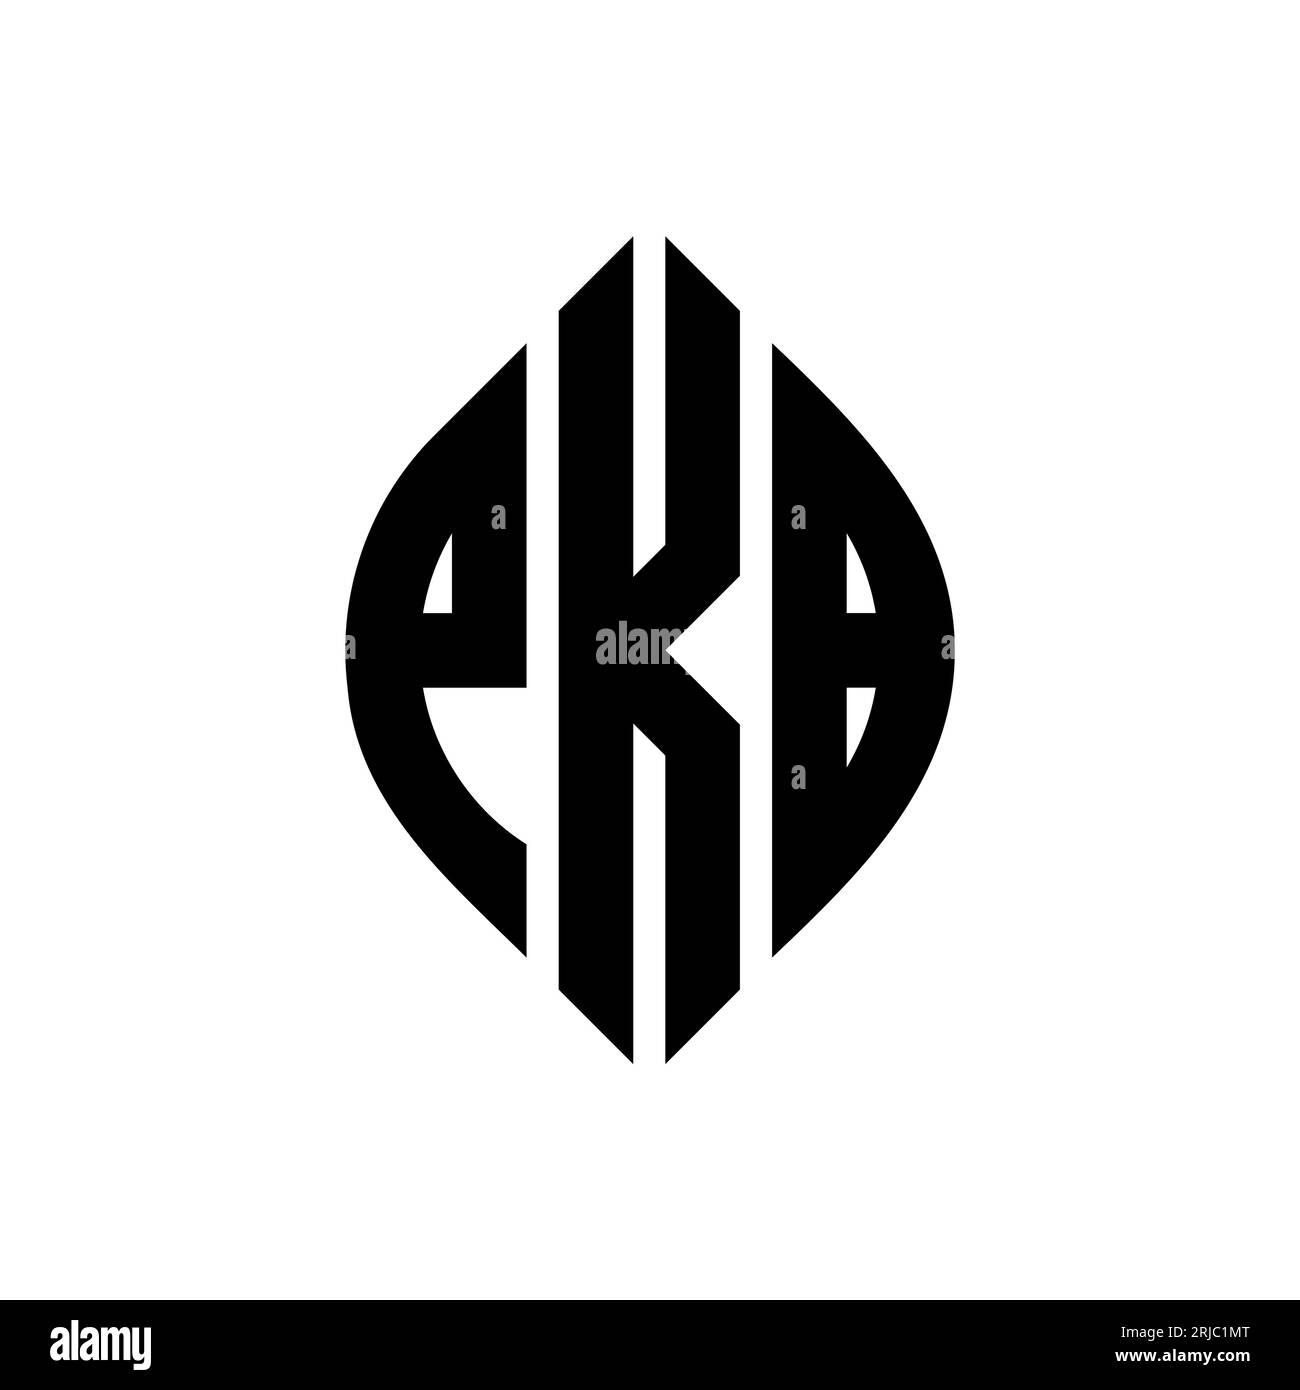 PKB circle letter logo design with circle and ellipse shape. PKB ellipse letters with typographic style. The three initials form a circle logo. PKB Ci Stock Vector